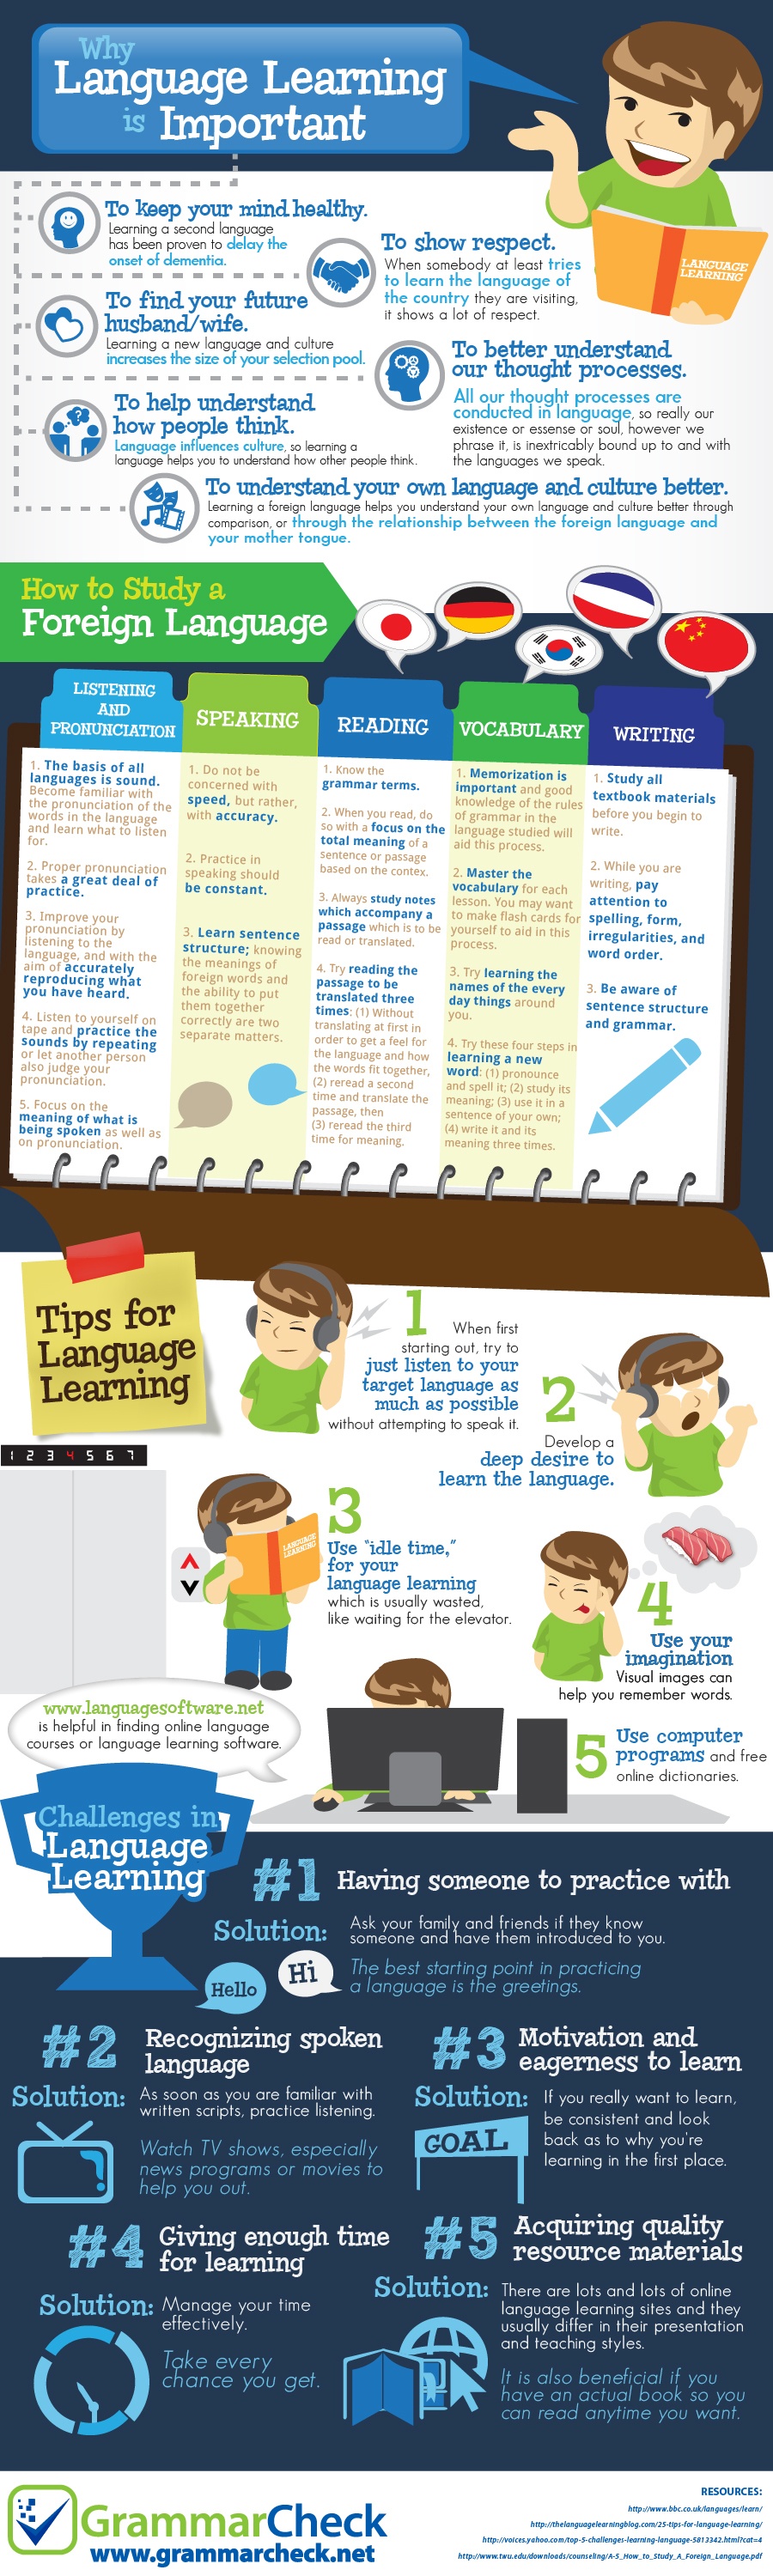 Why Language Learning is Important Infographic